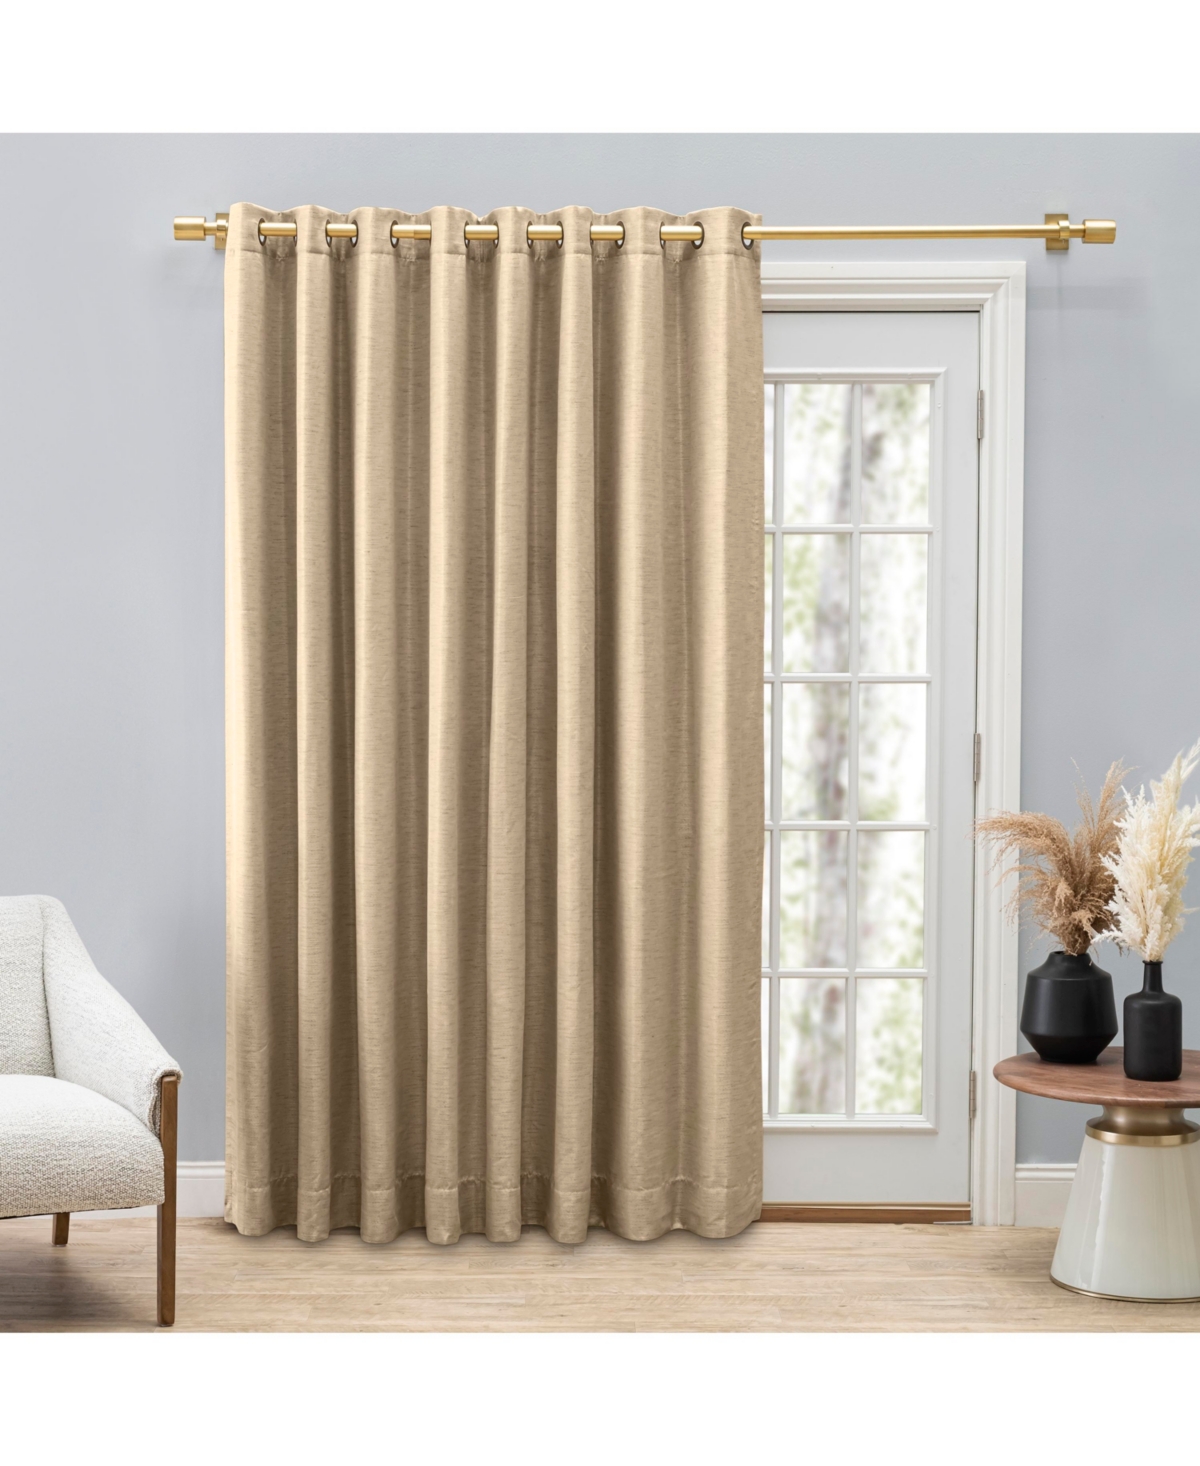 Grasscloth Lined Grommet Curtain Patio Panel w/Wand 110"W x 84"L - Navy